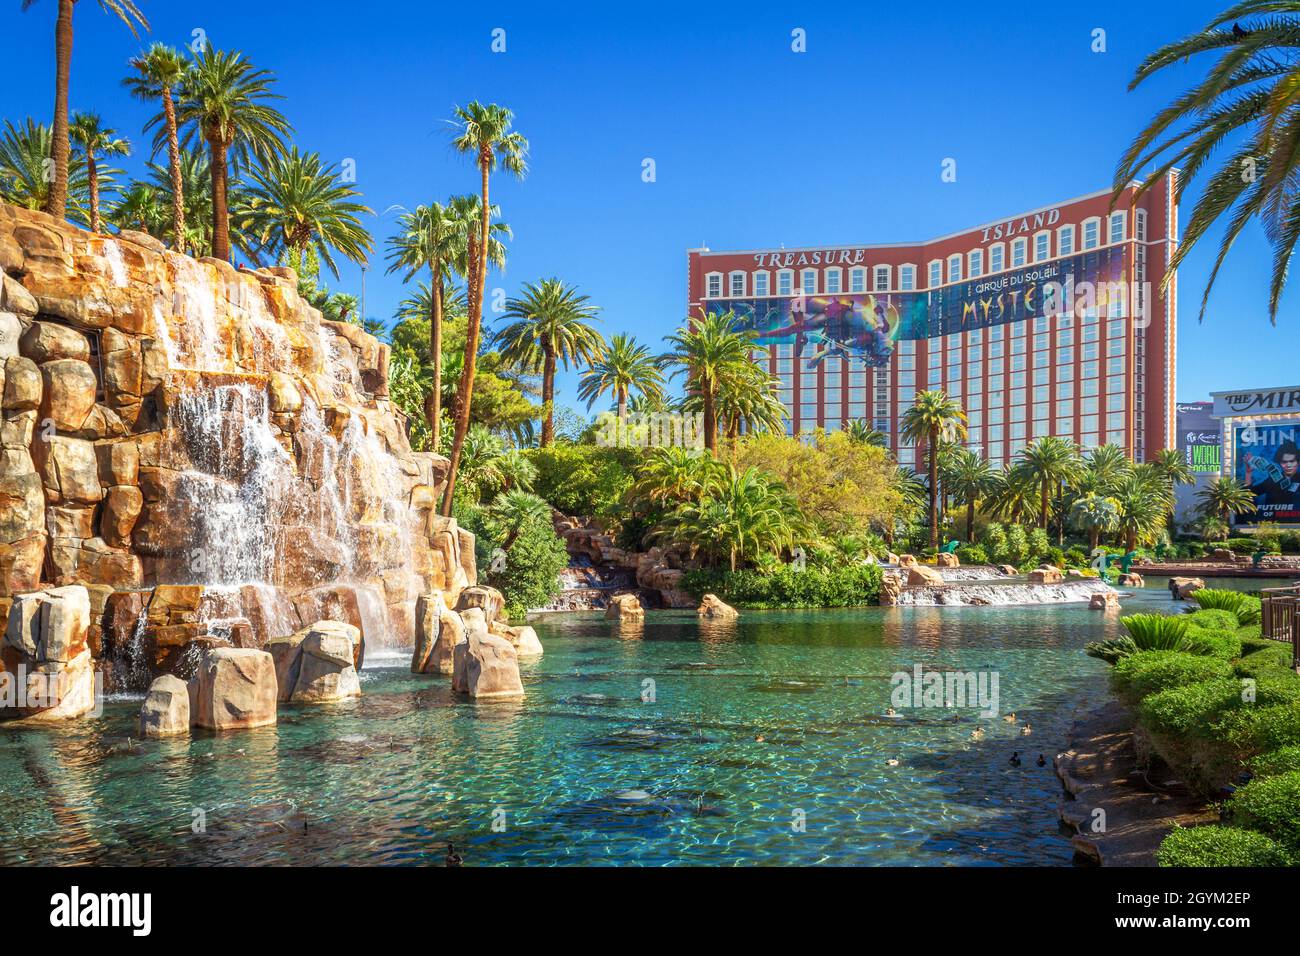 Las Vegas, NV, USA – June 8, 2021: Waterfall at The Mirage Hotel and Casino with Treasure Island in the background located in Las Vegas, Nevada. Stock Photo